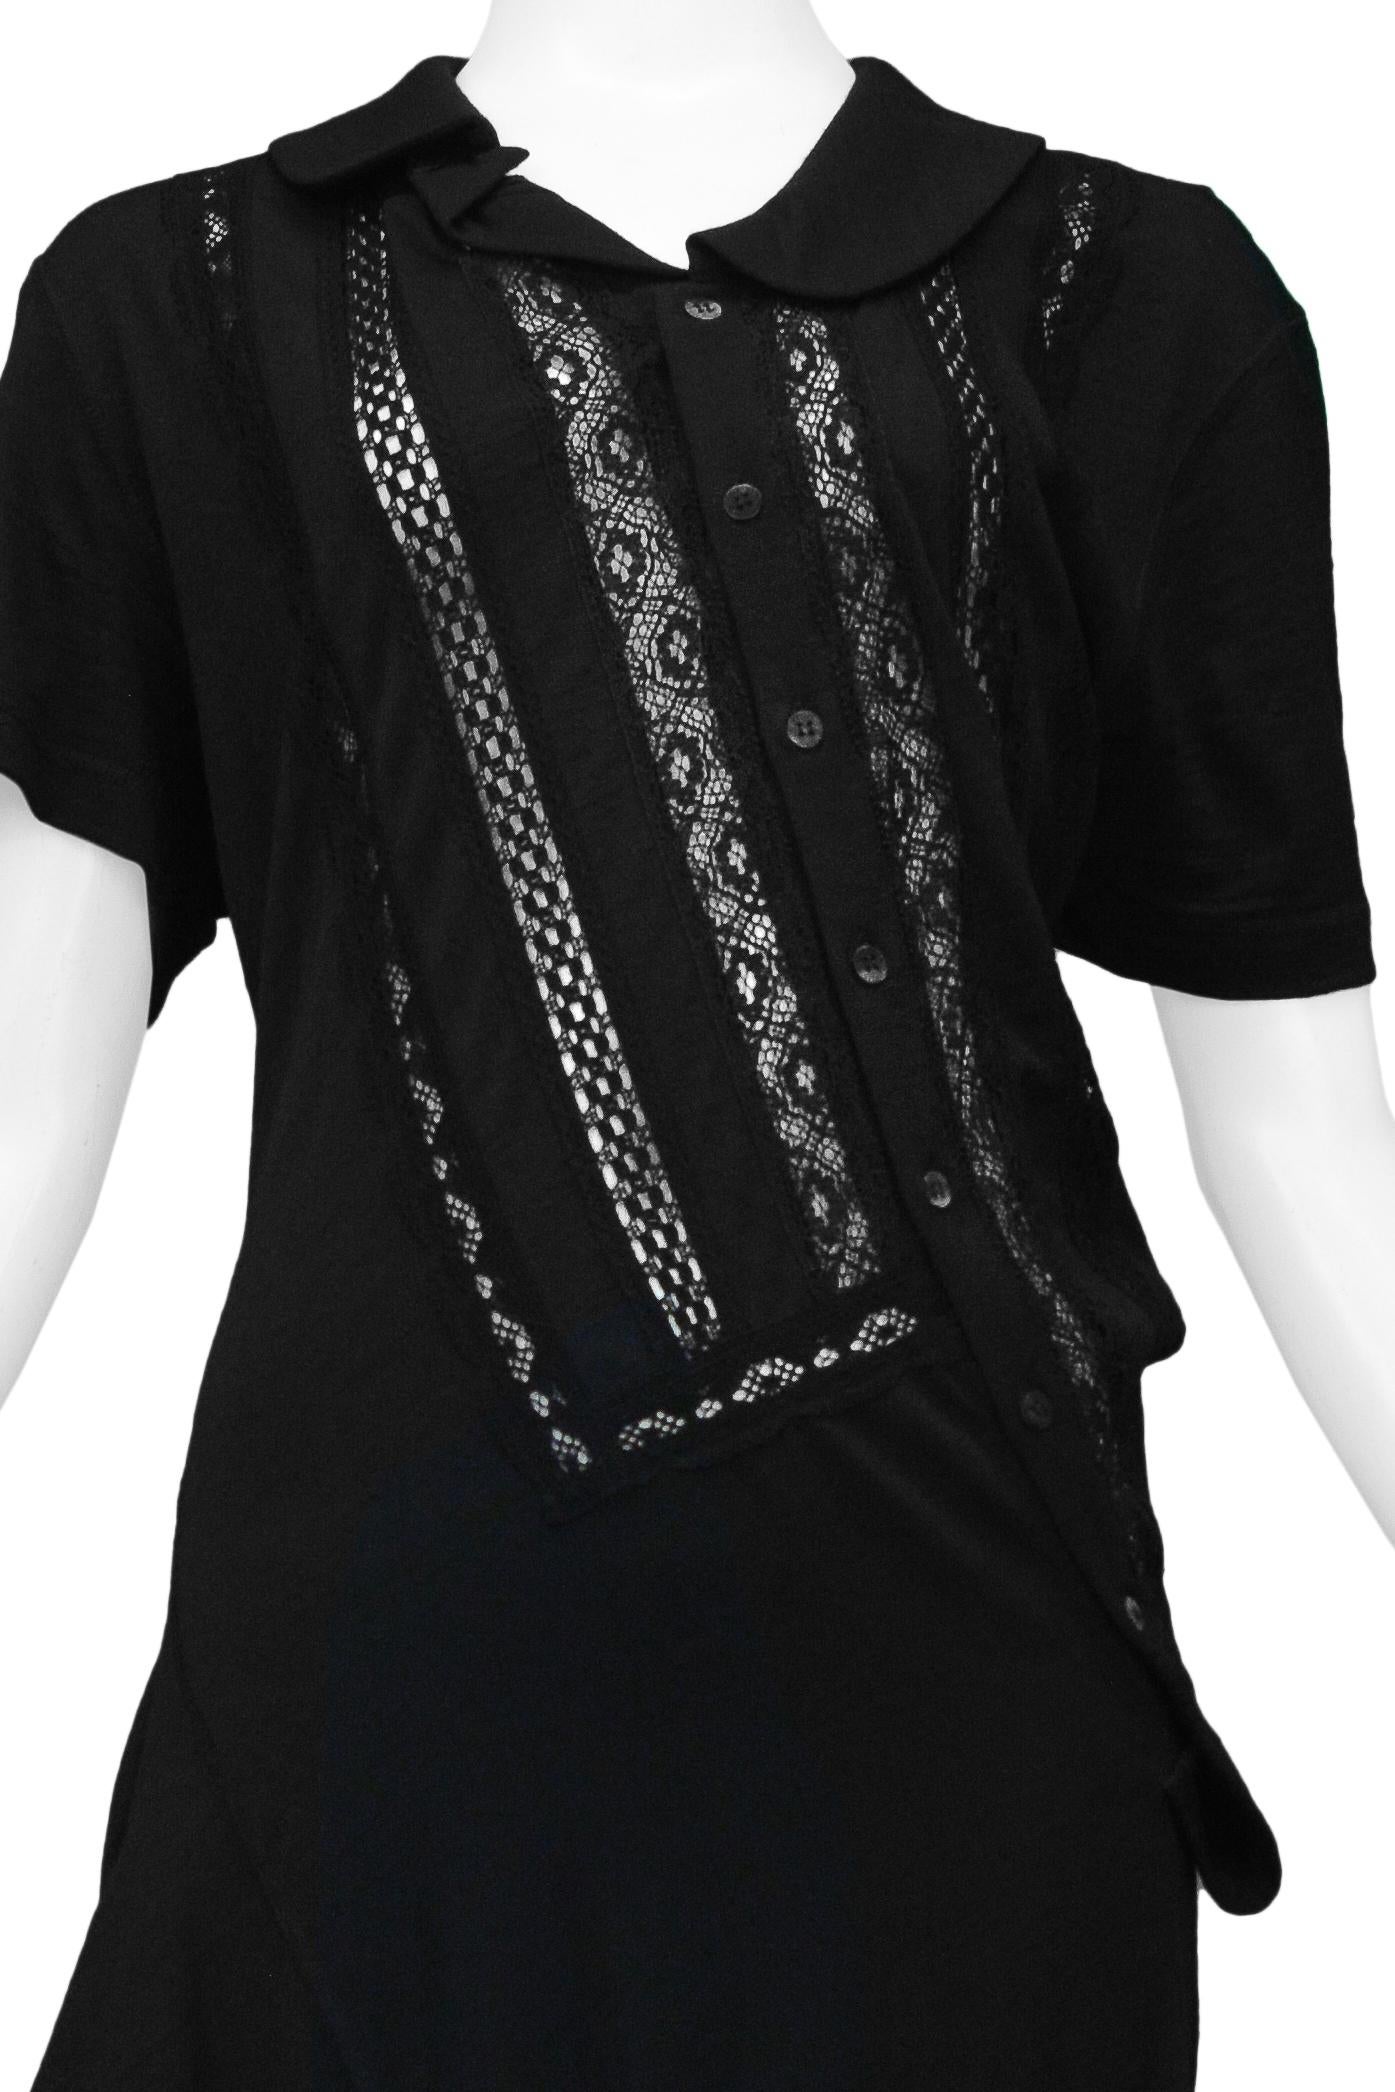 Junya Watanabe Black Twist Dress With Lace Insets 2007 For Sale 1